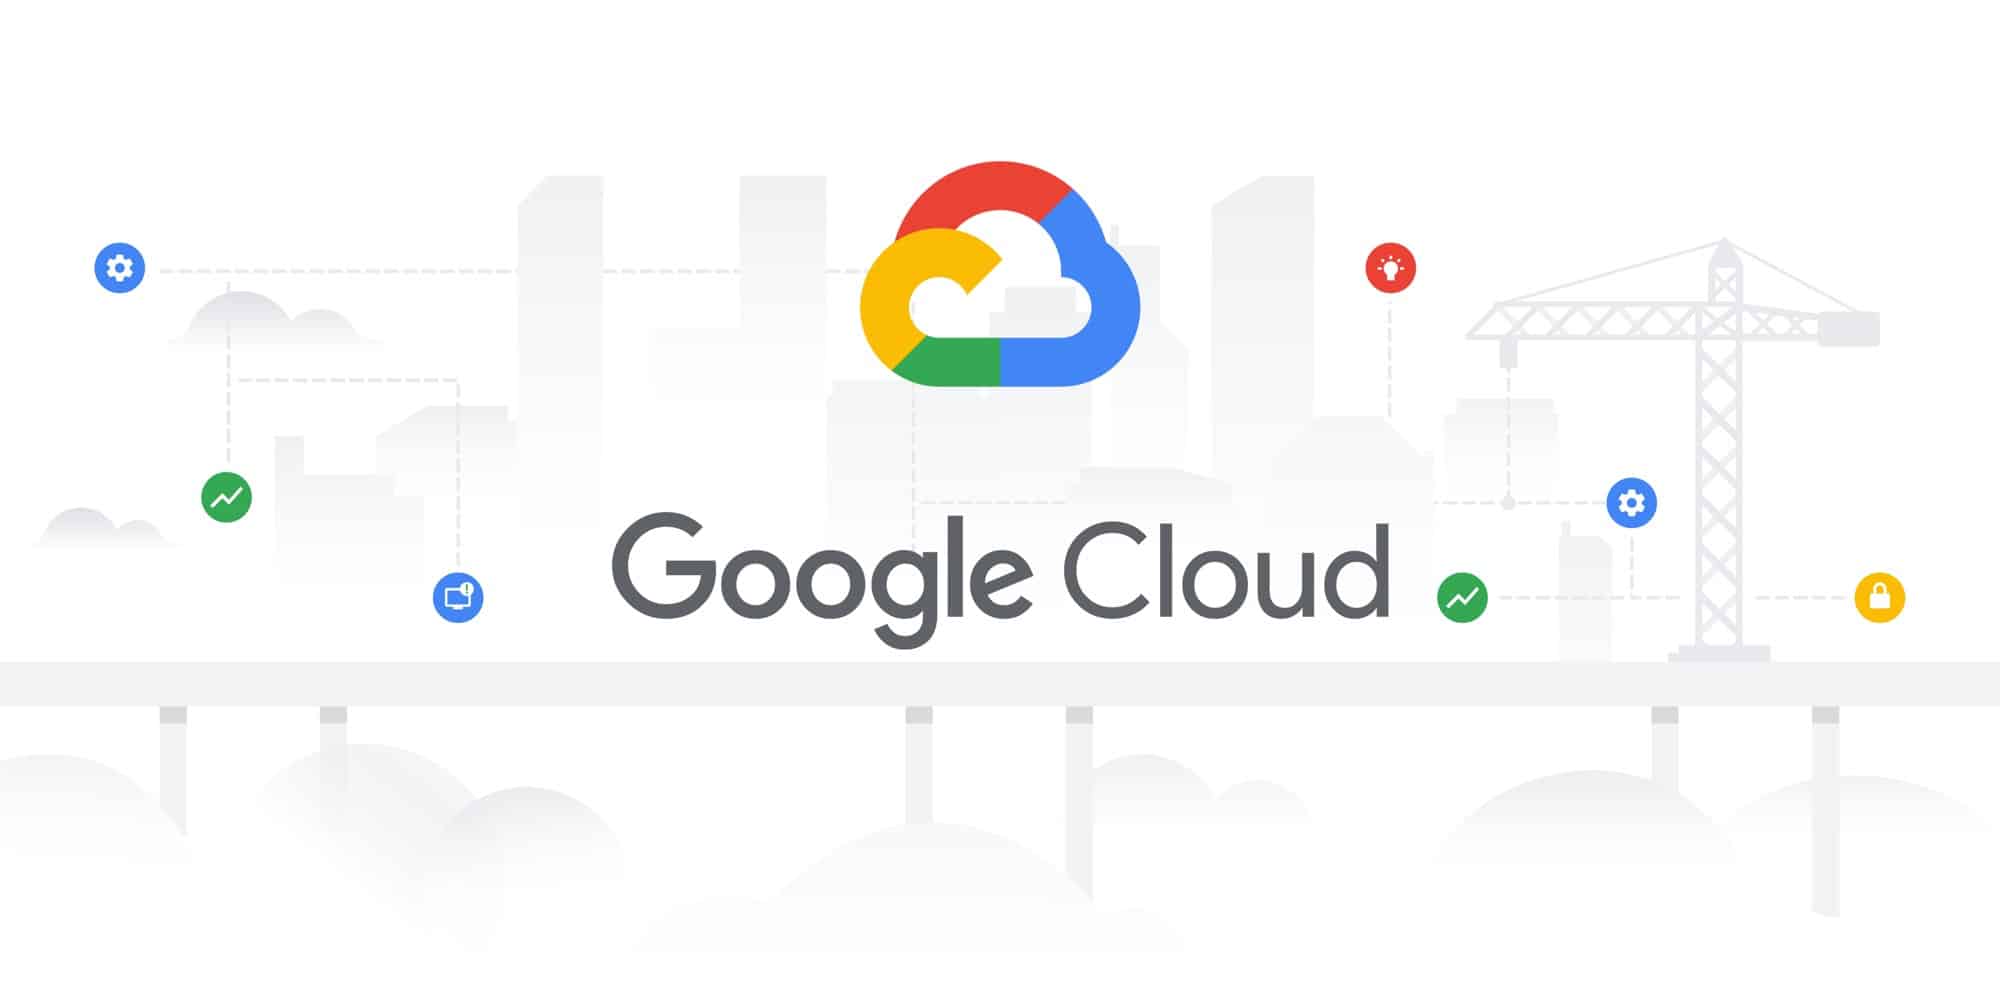 Illustration of Google Cloud logo with connections to building tools